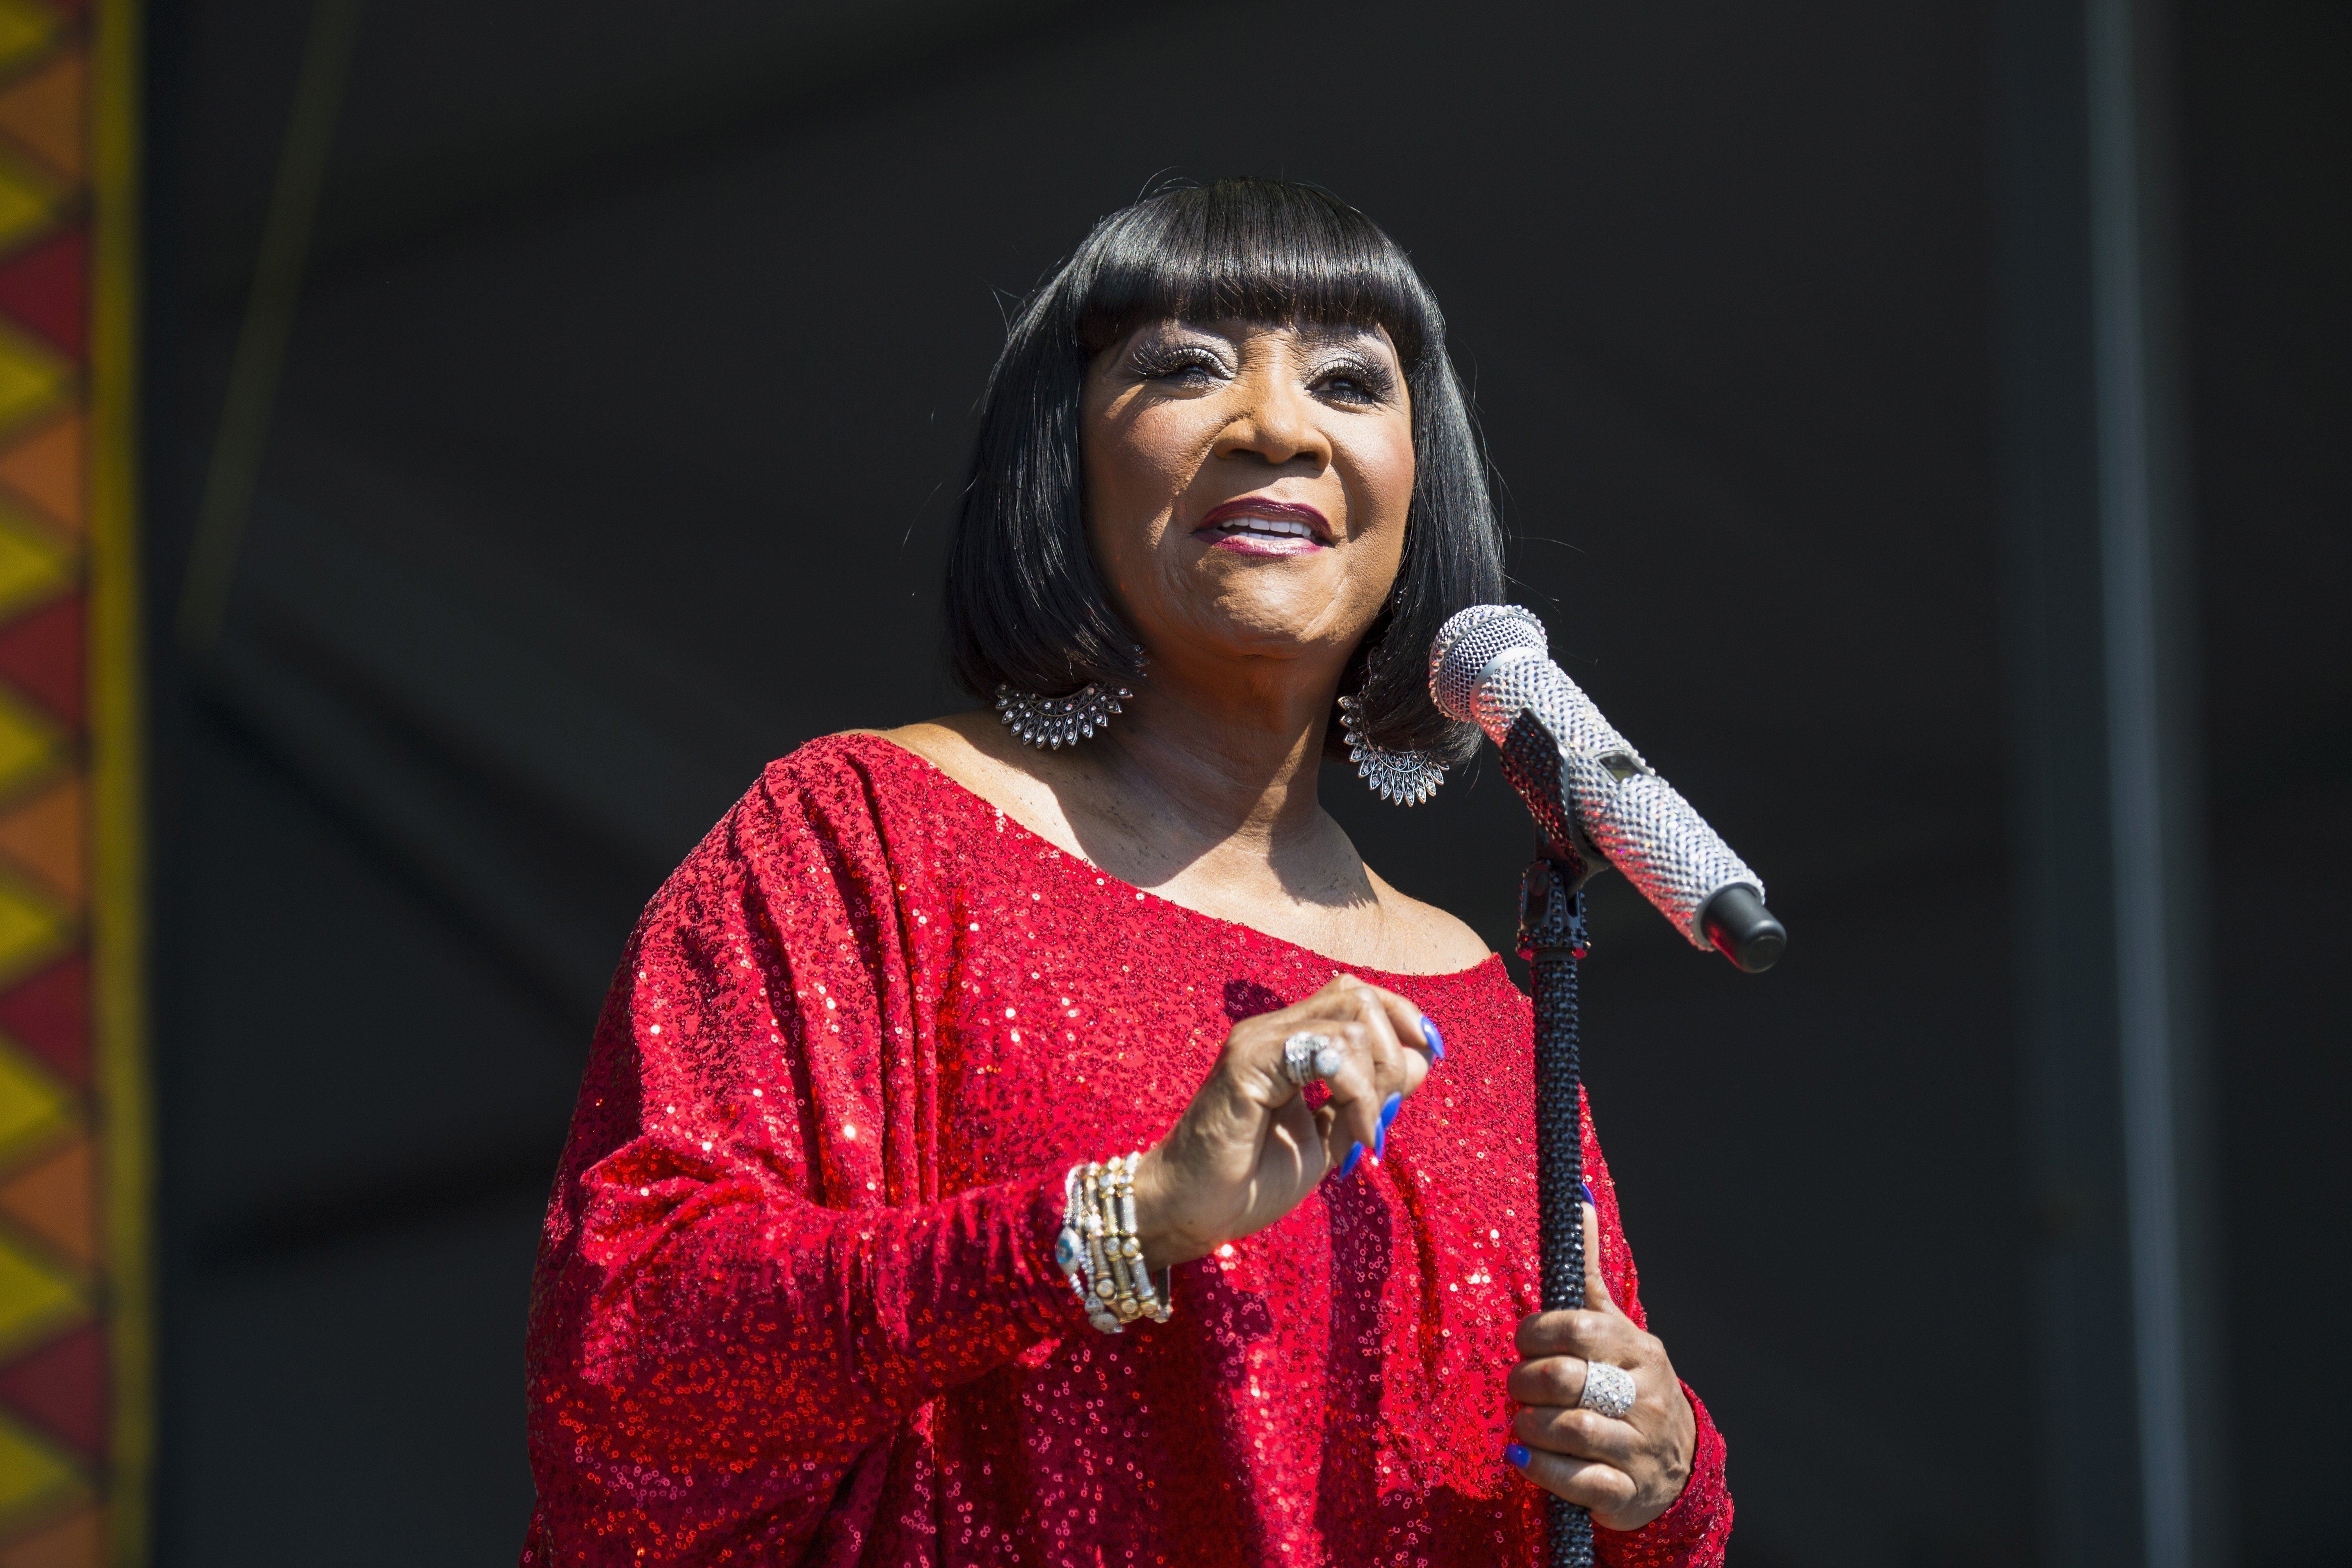 Patti LaBelle performing at the 2017 New Orleans Jazz & Heritage Festival. | Photo: Getty Images